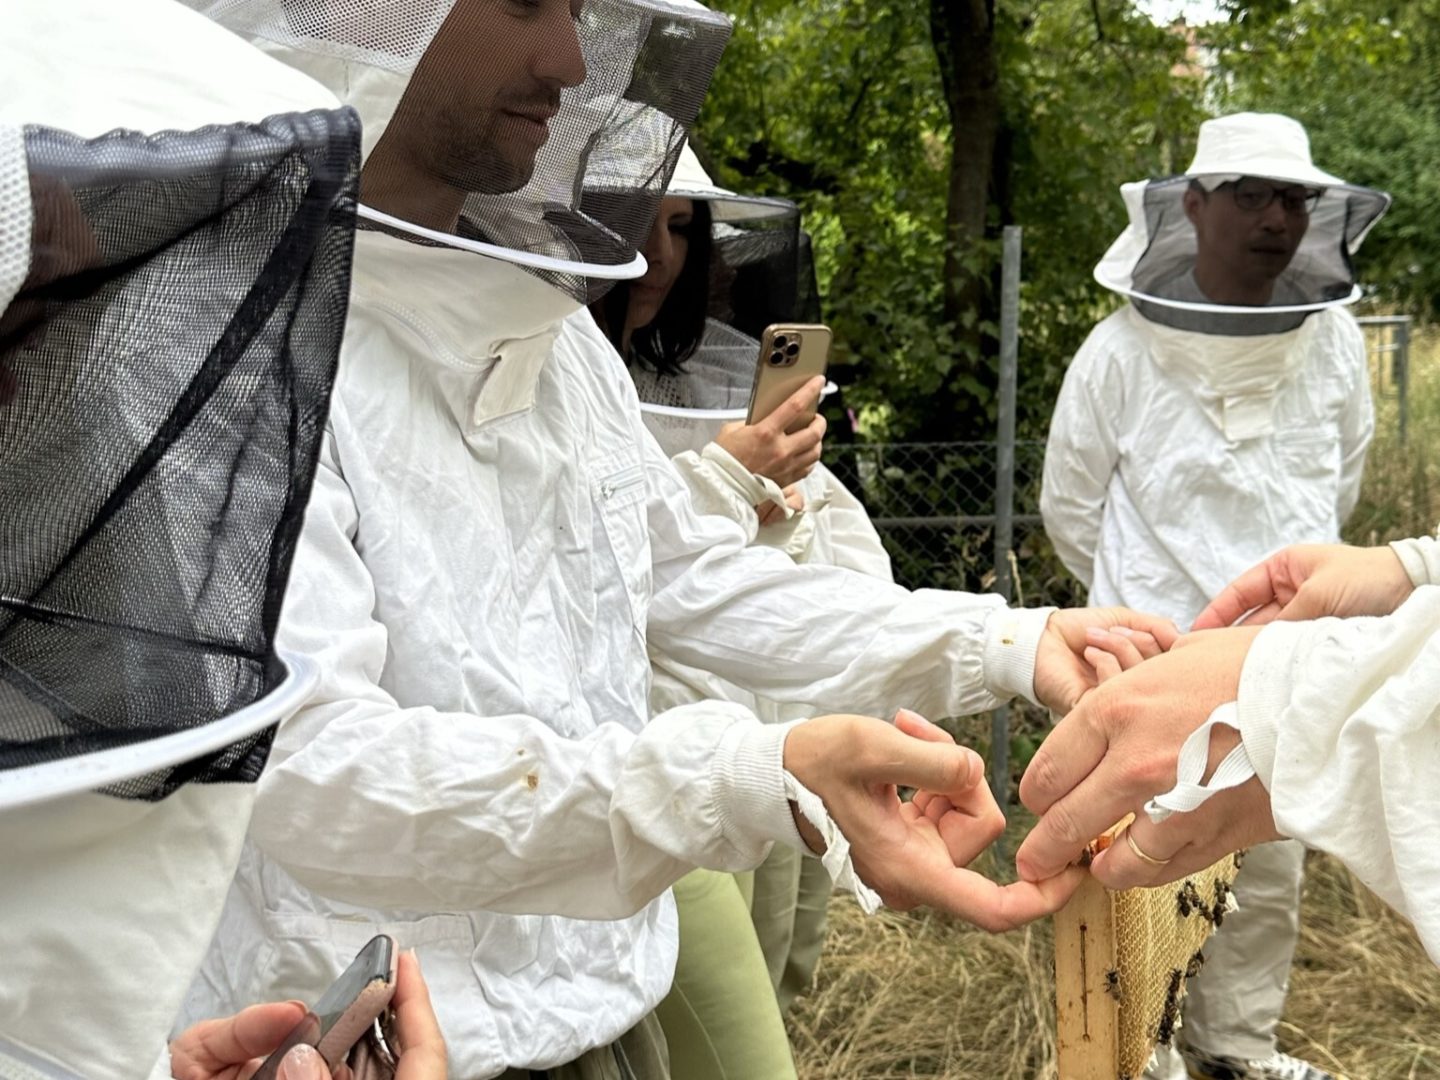 a group and one person is handed a frame full of bees